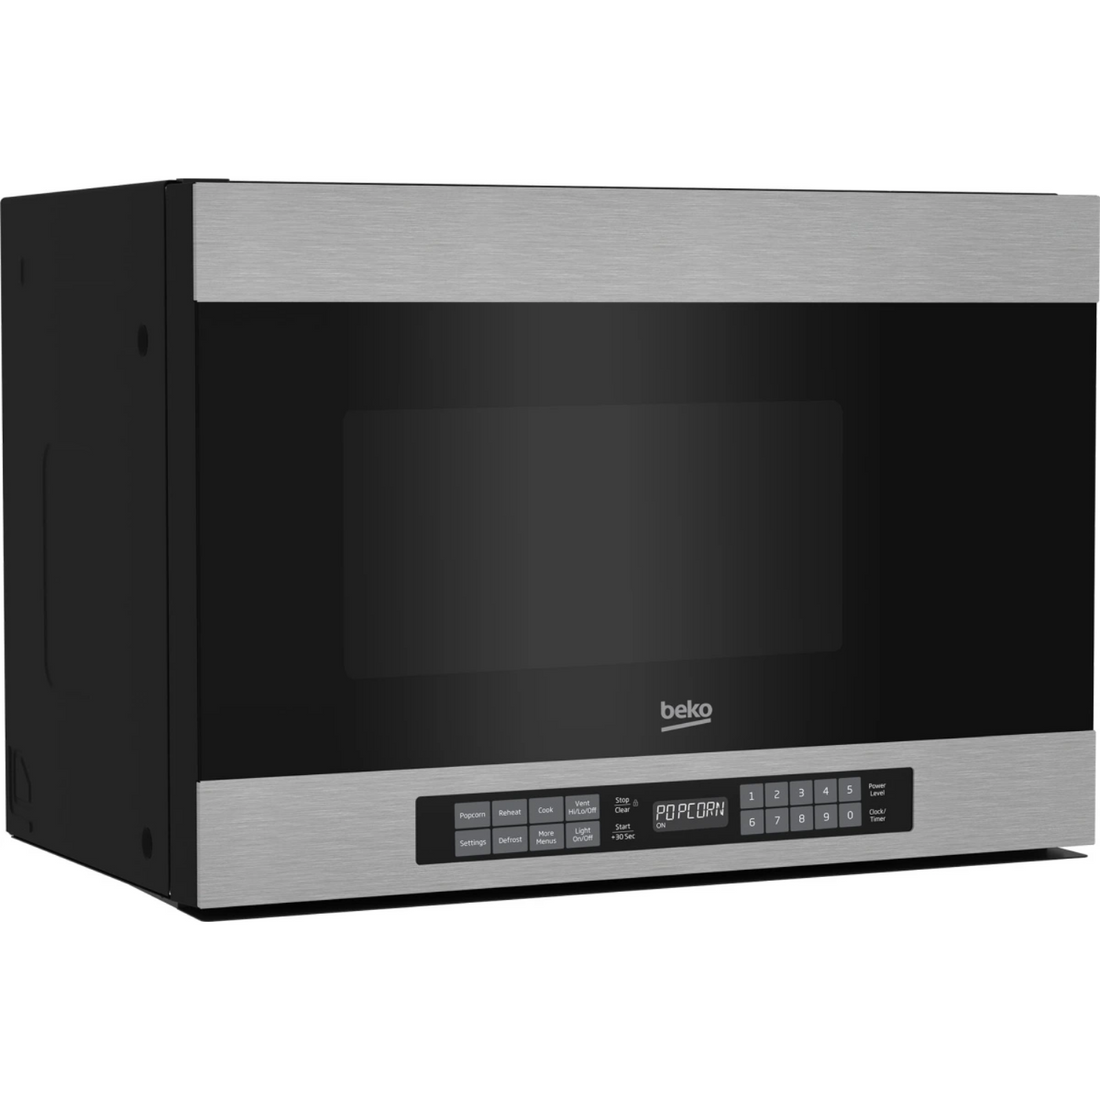 Beko 1.4 Cu. Ft. Stainless Steel with Black Glass Built In Microwave